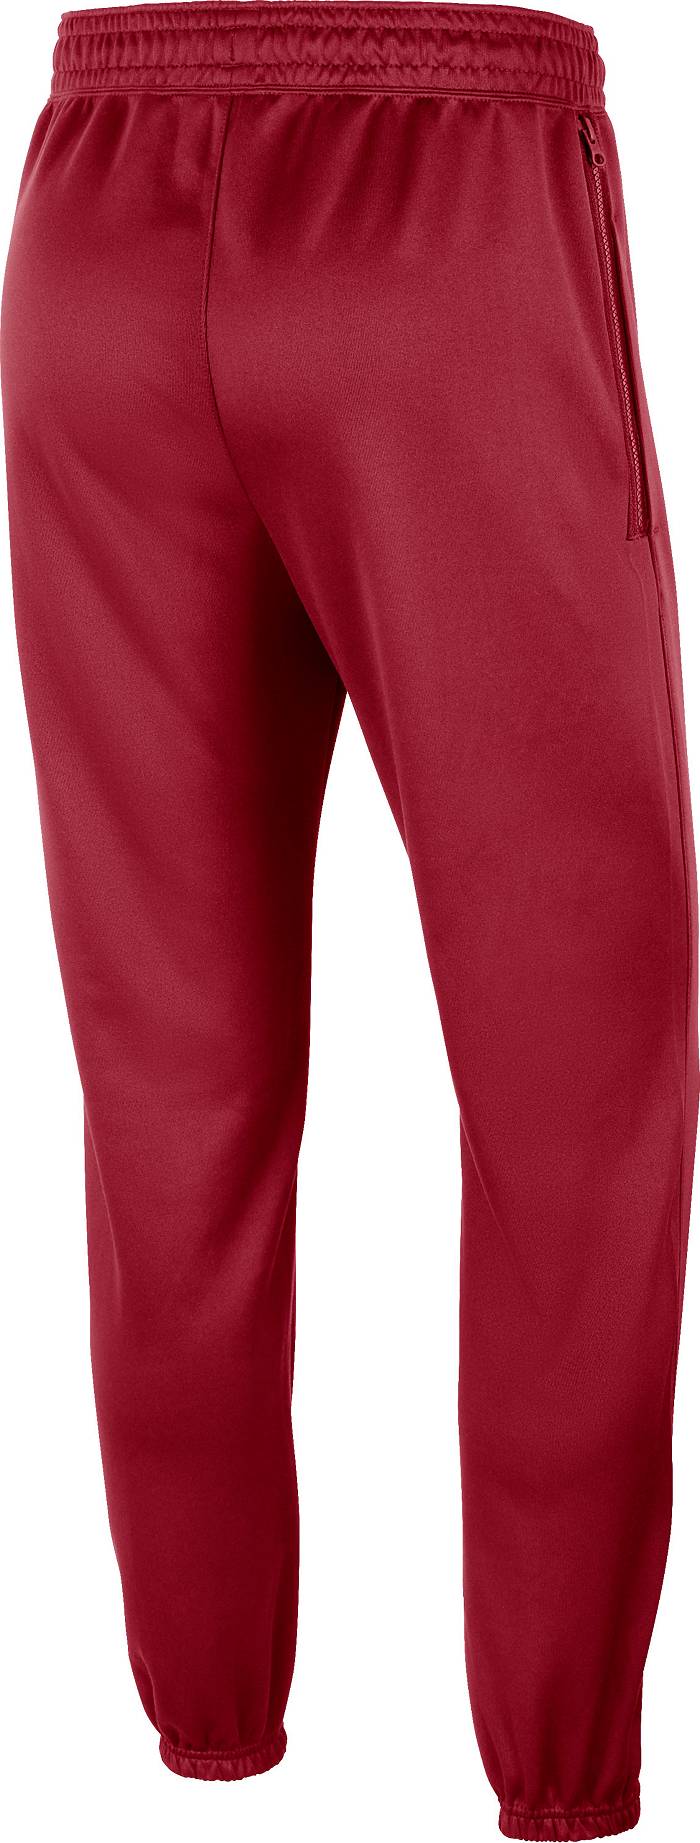 NIKE NBA CLEVELAND CAVALIERS THERMAFLEX SHOWTIME PANTS TEAM RED